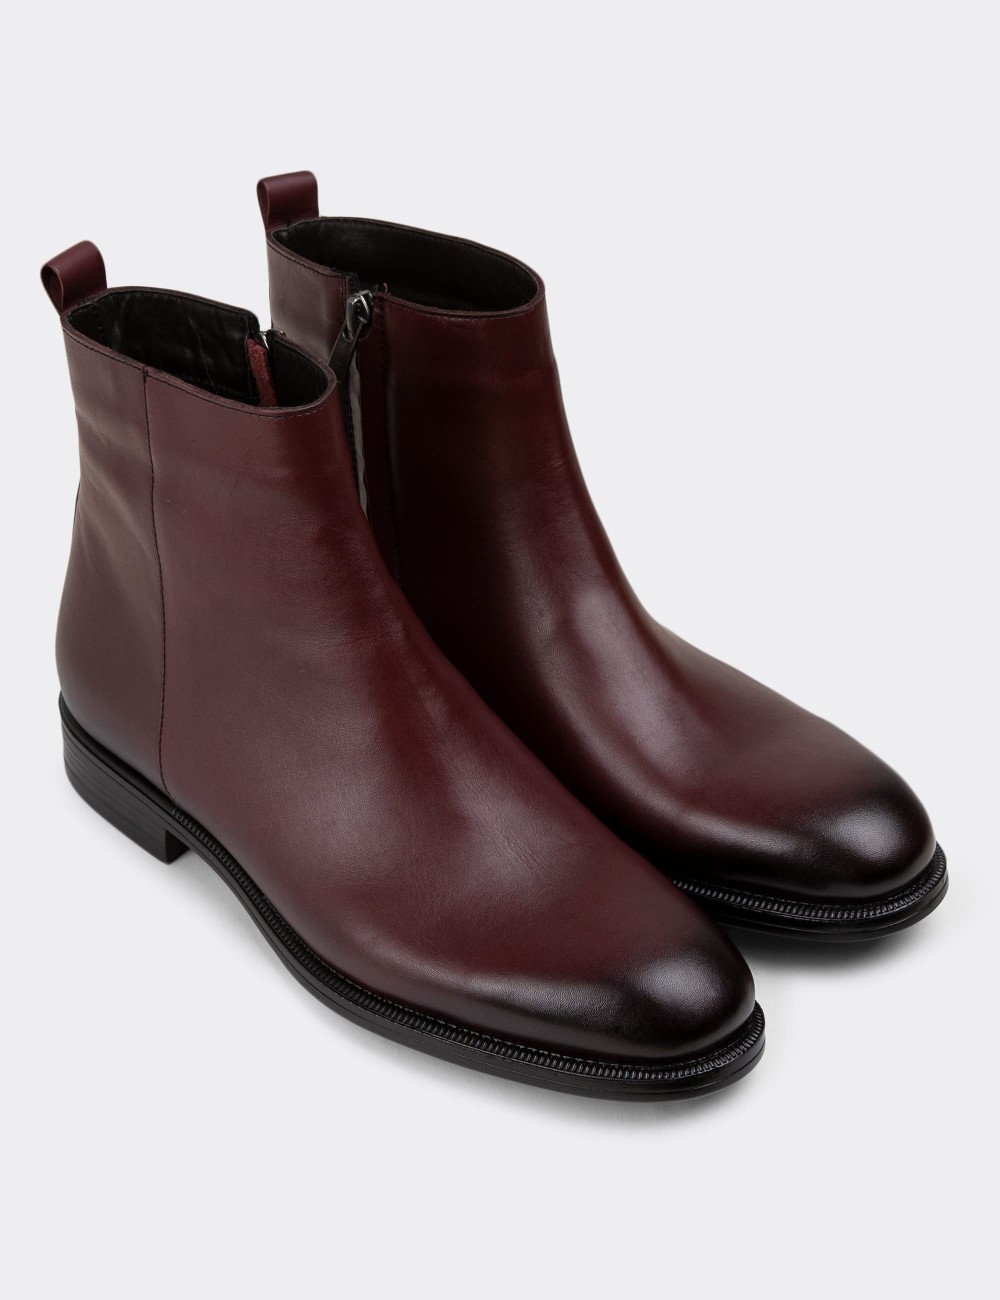 Burgundy Leather Boots - 01921MBRDC01